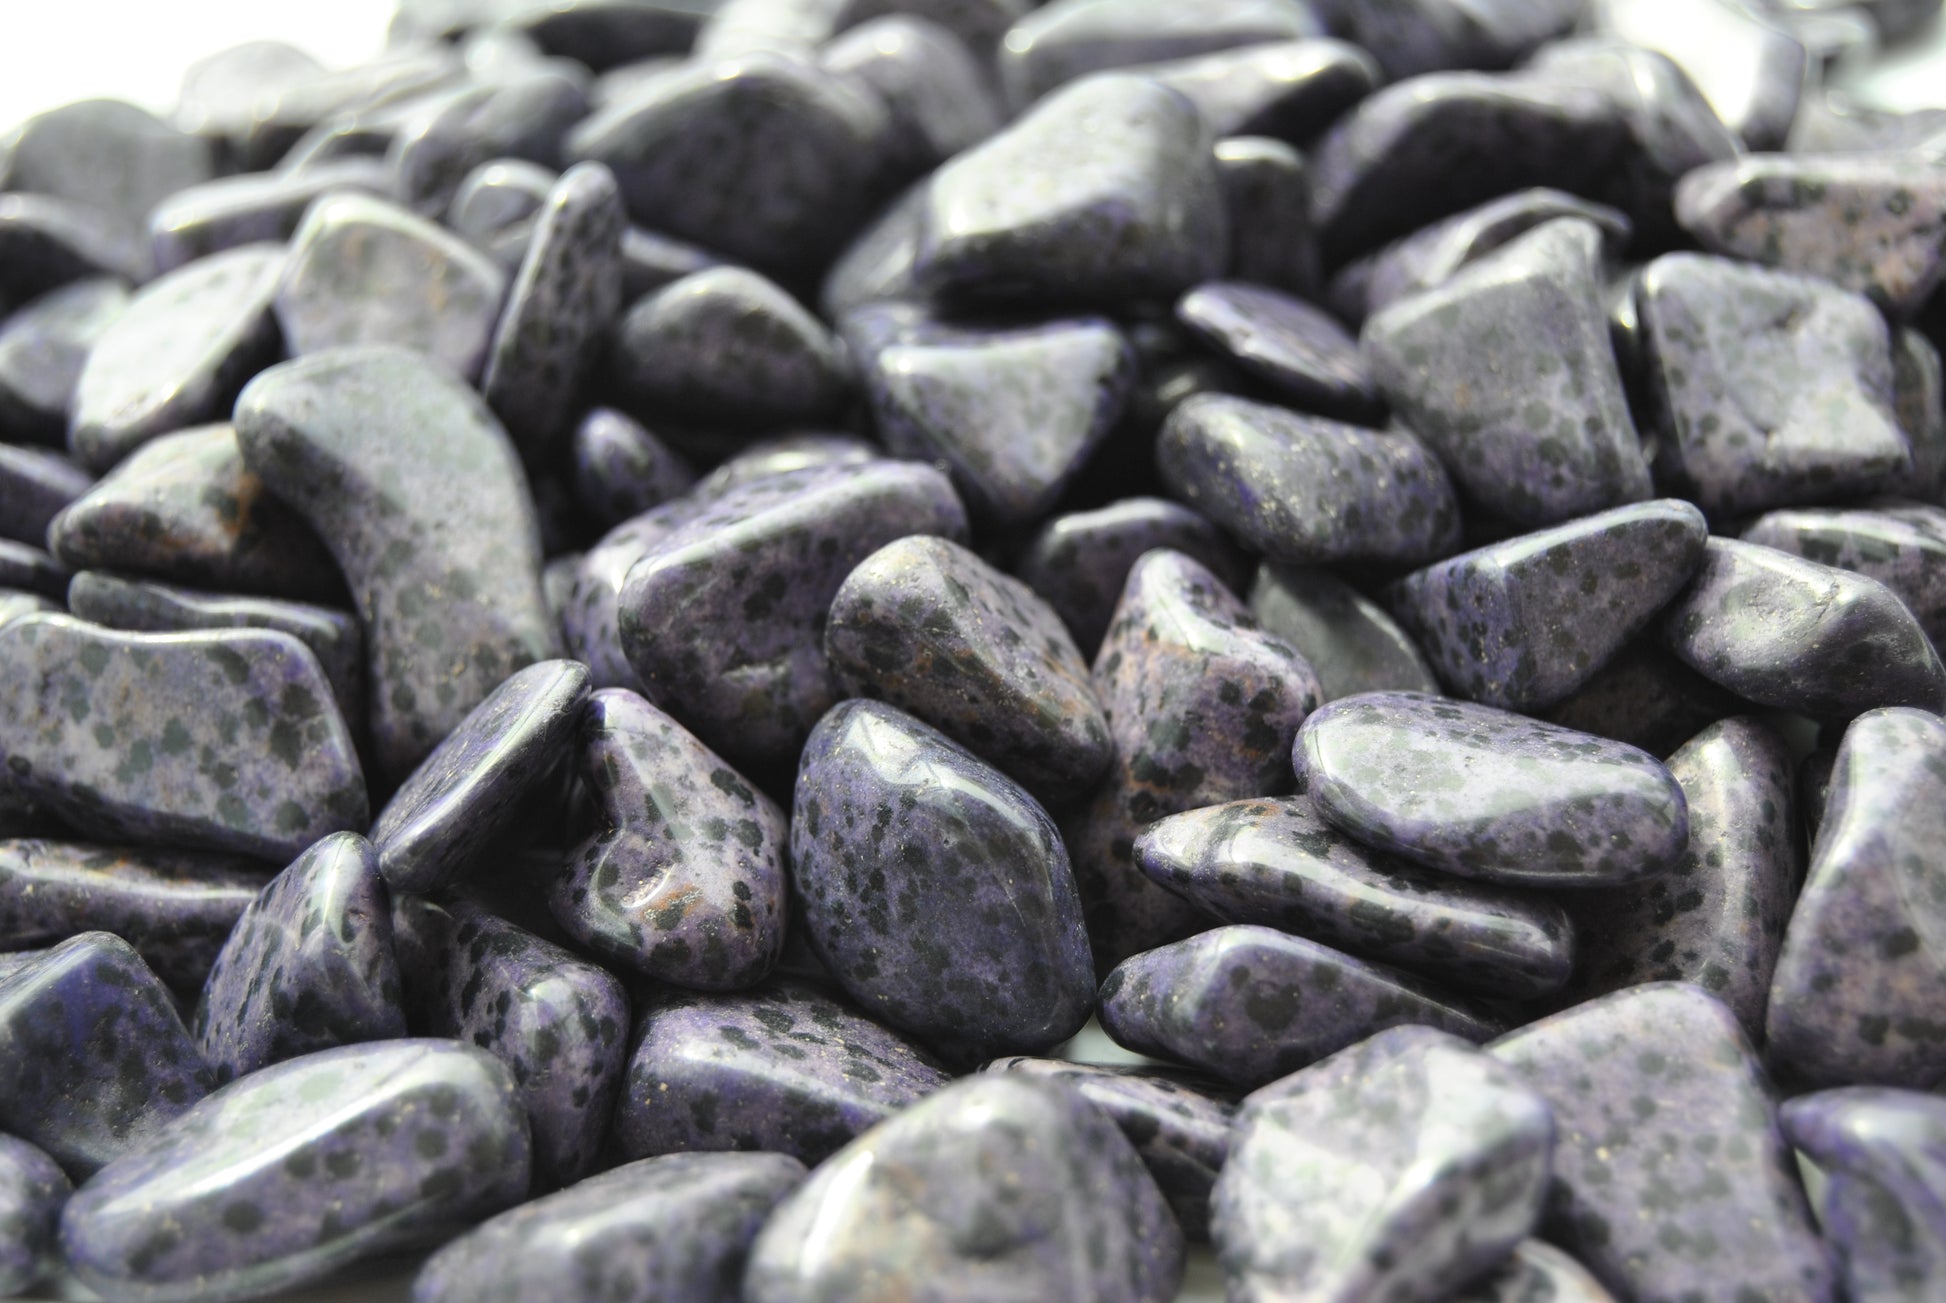 A close up view of an assortment of purple dalmation jasper stones. The stones are a dark purple with black spots.